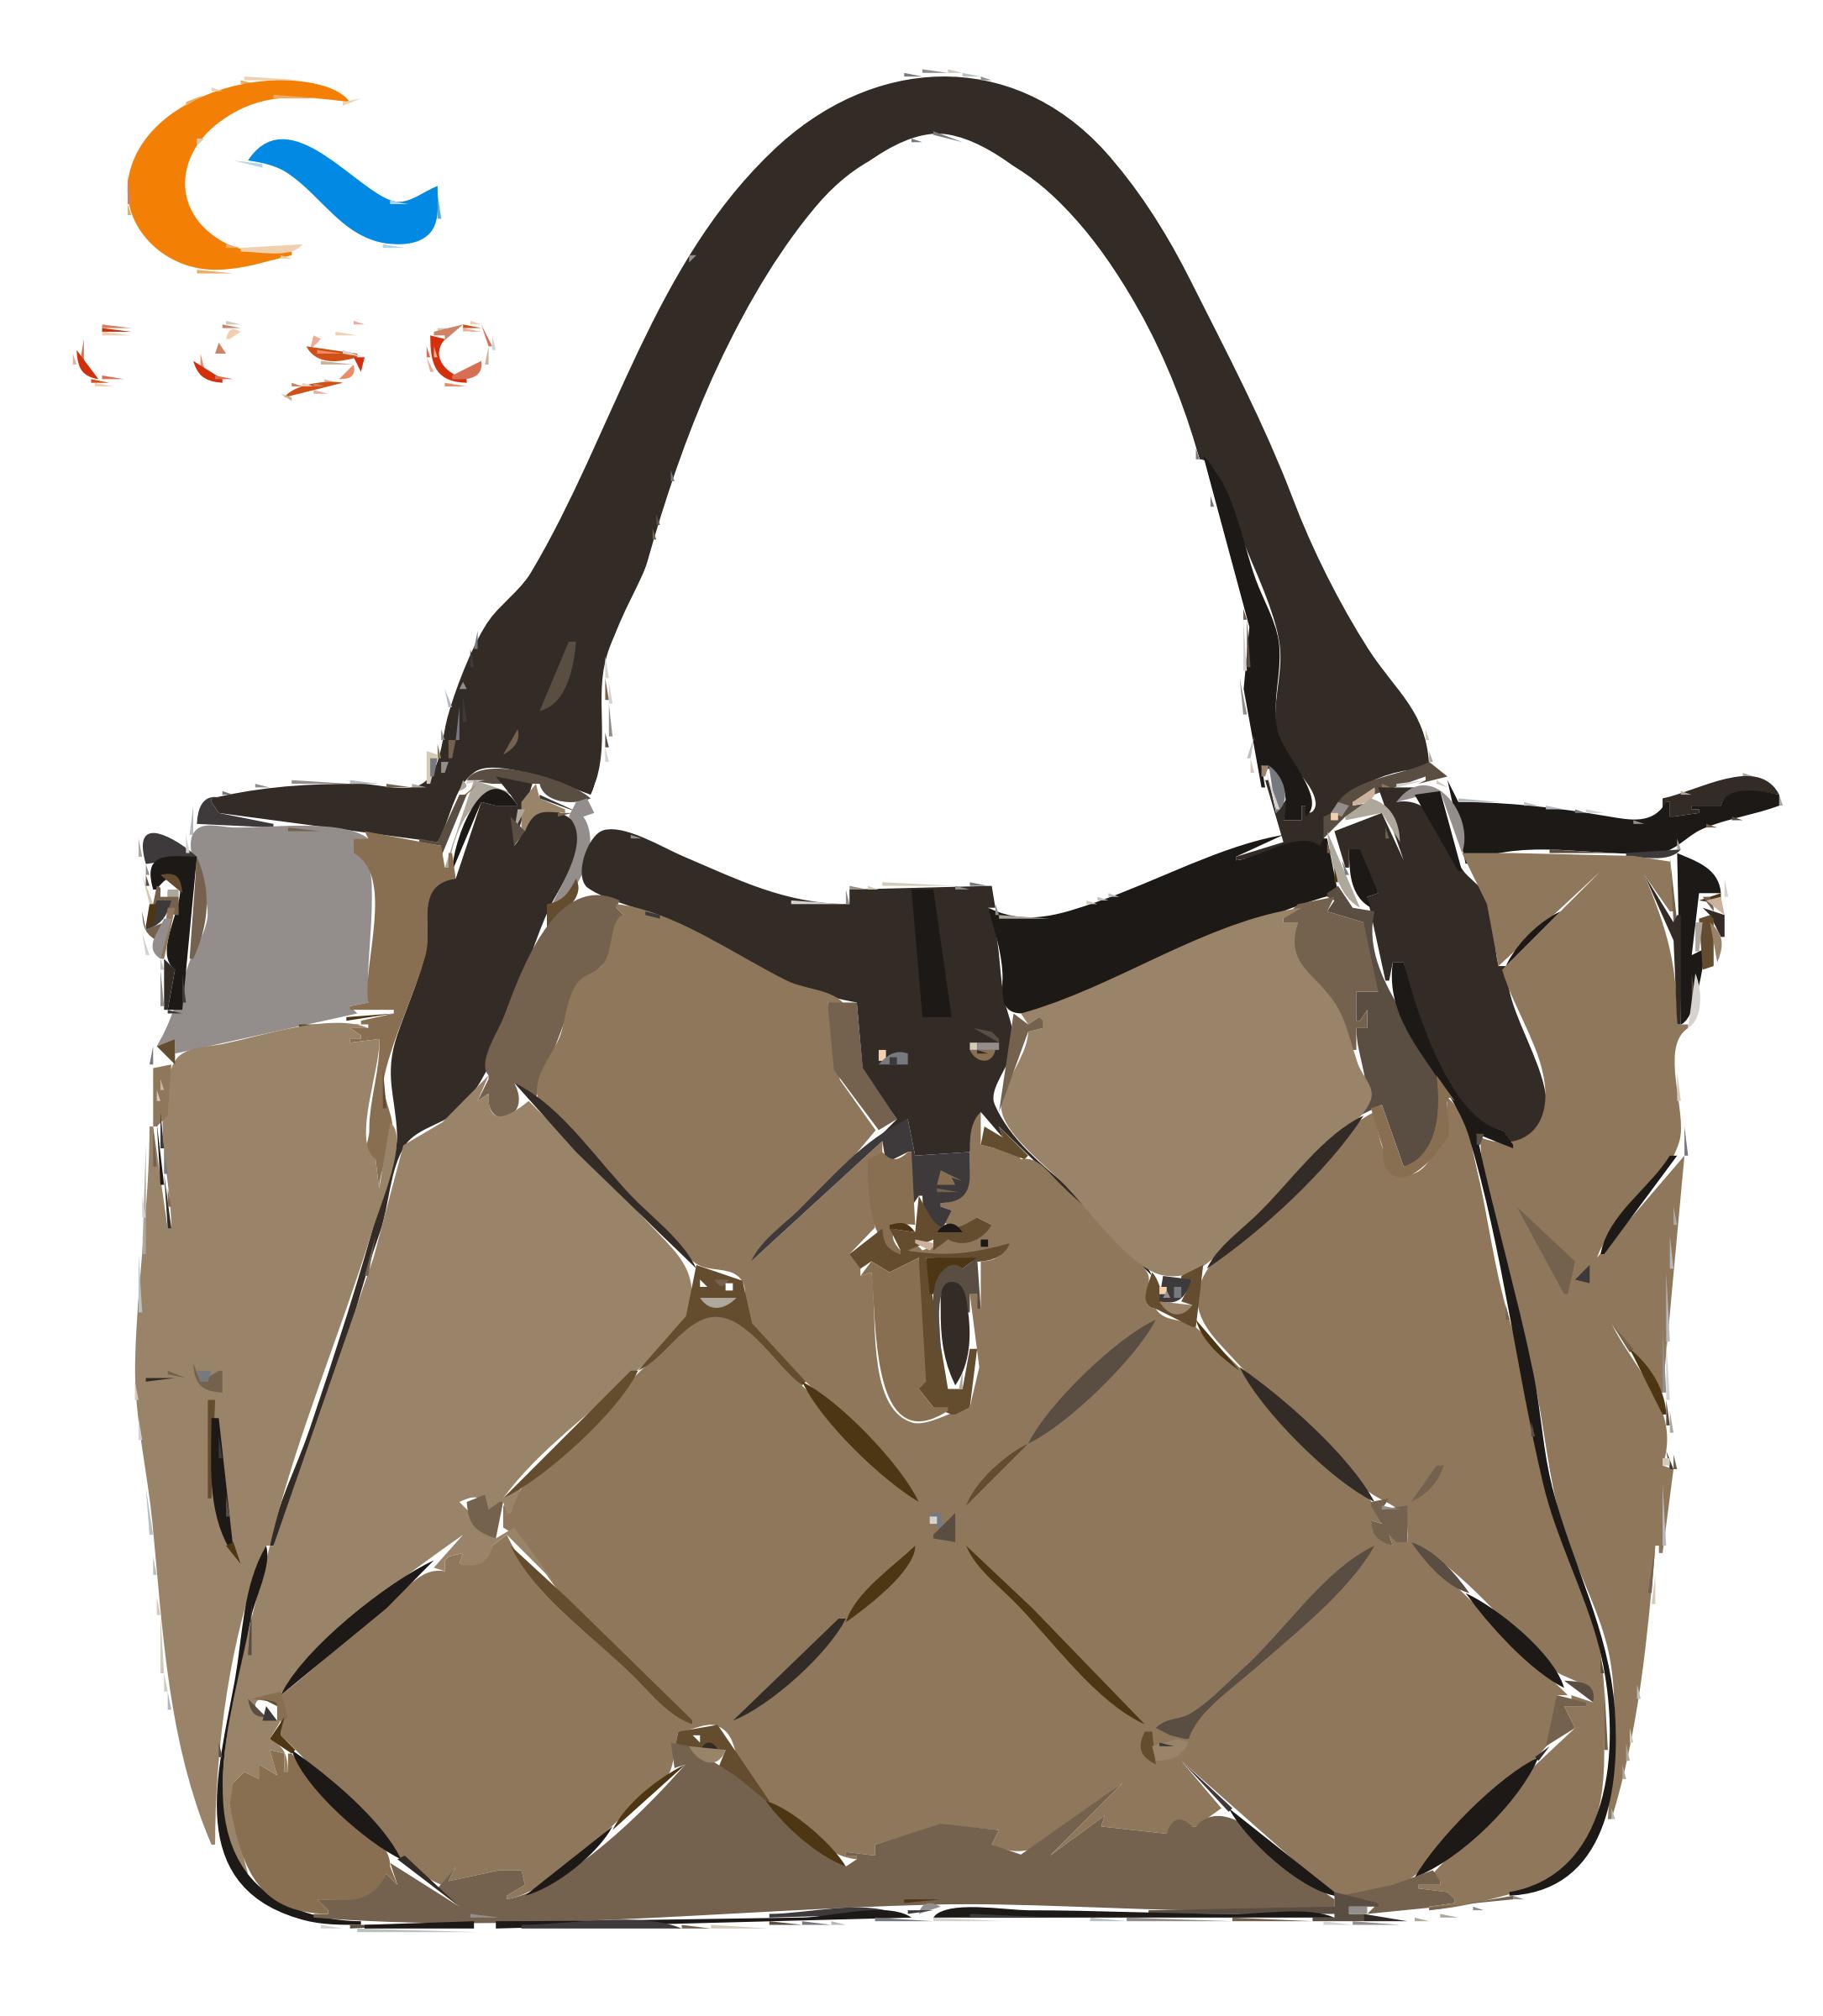 Crisscross Leather Bag with Logo png